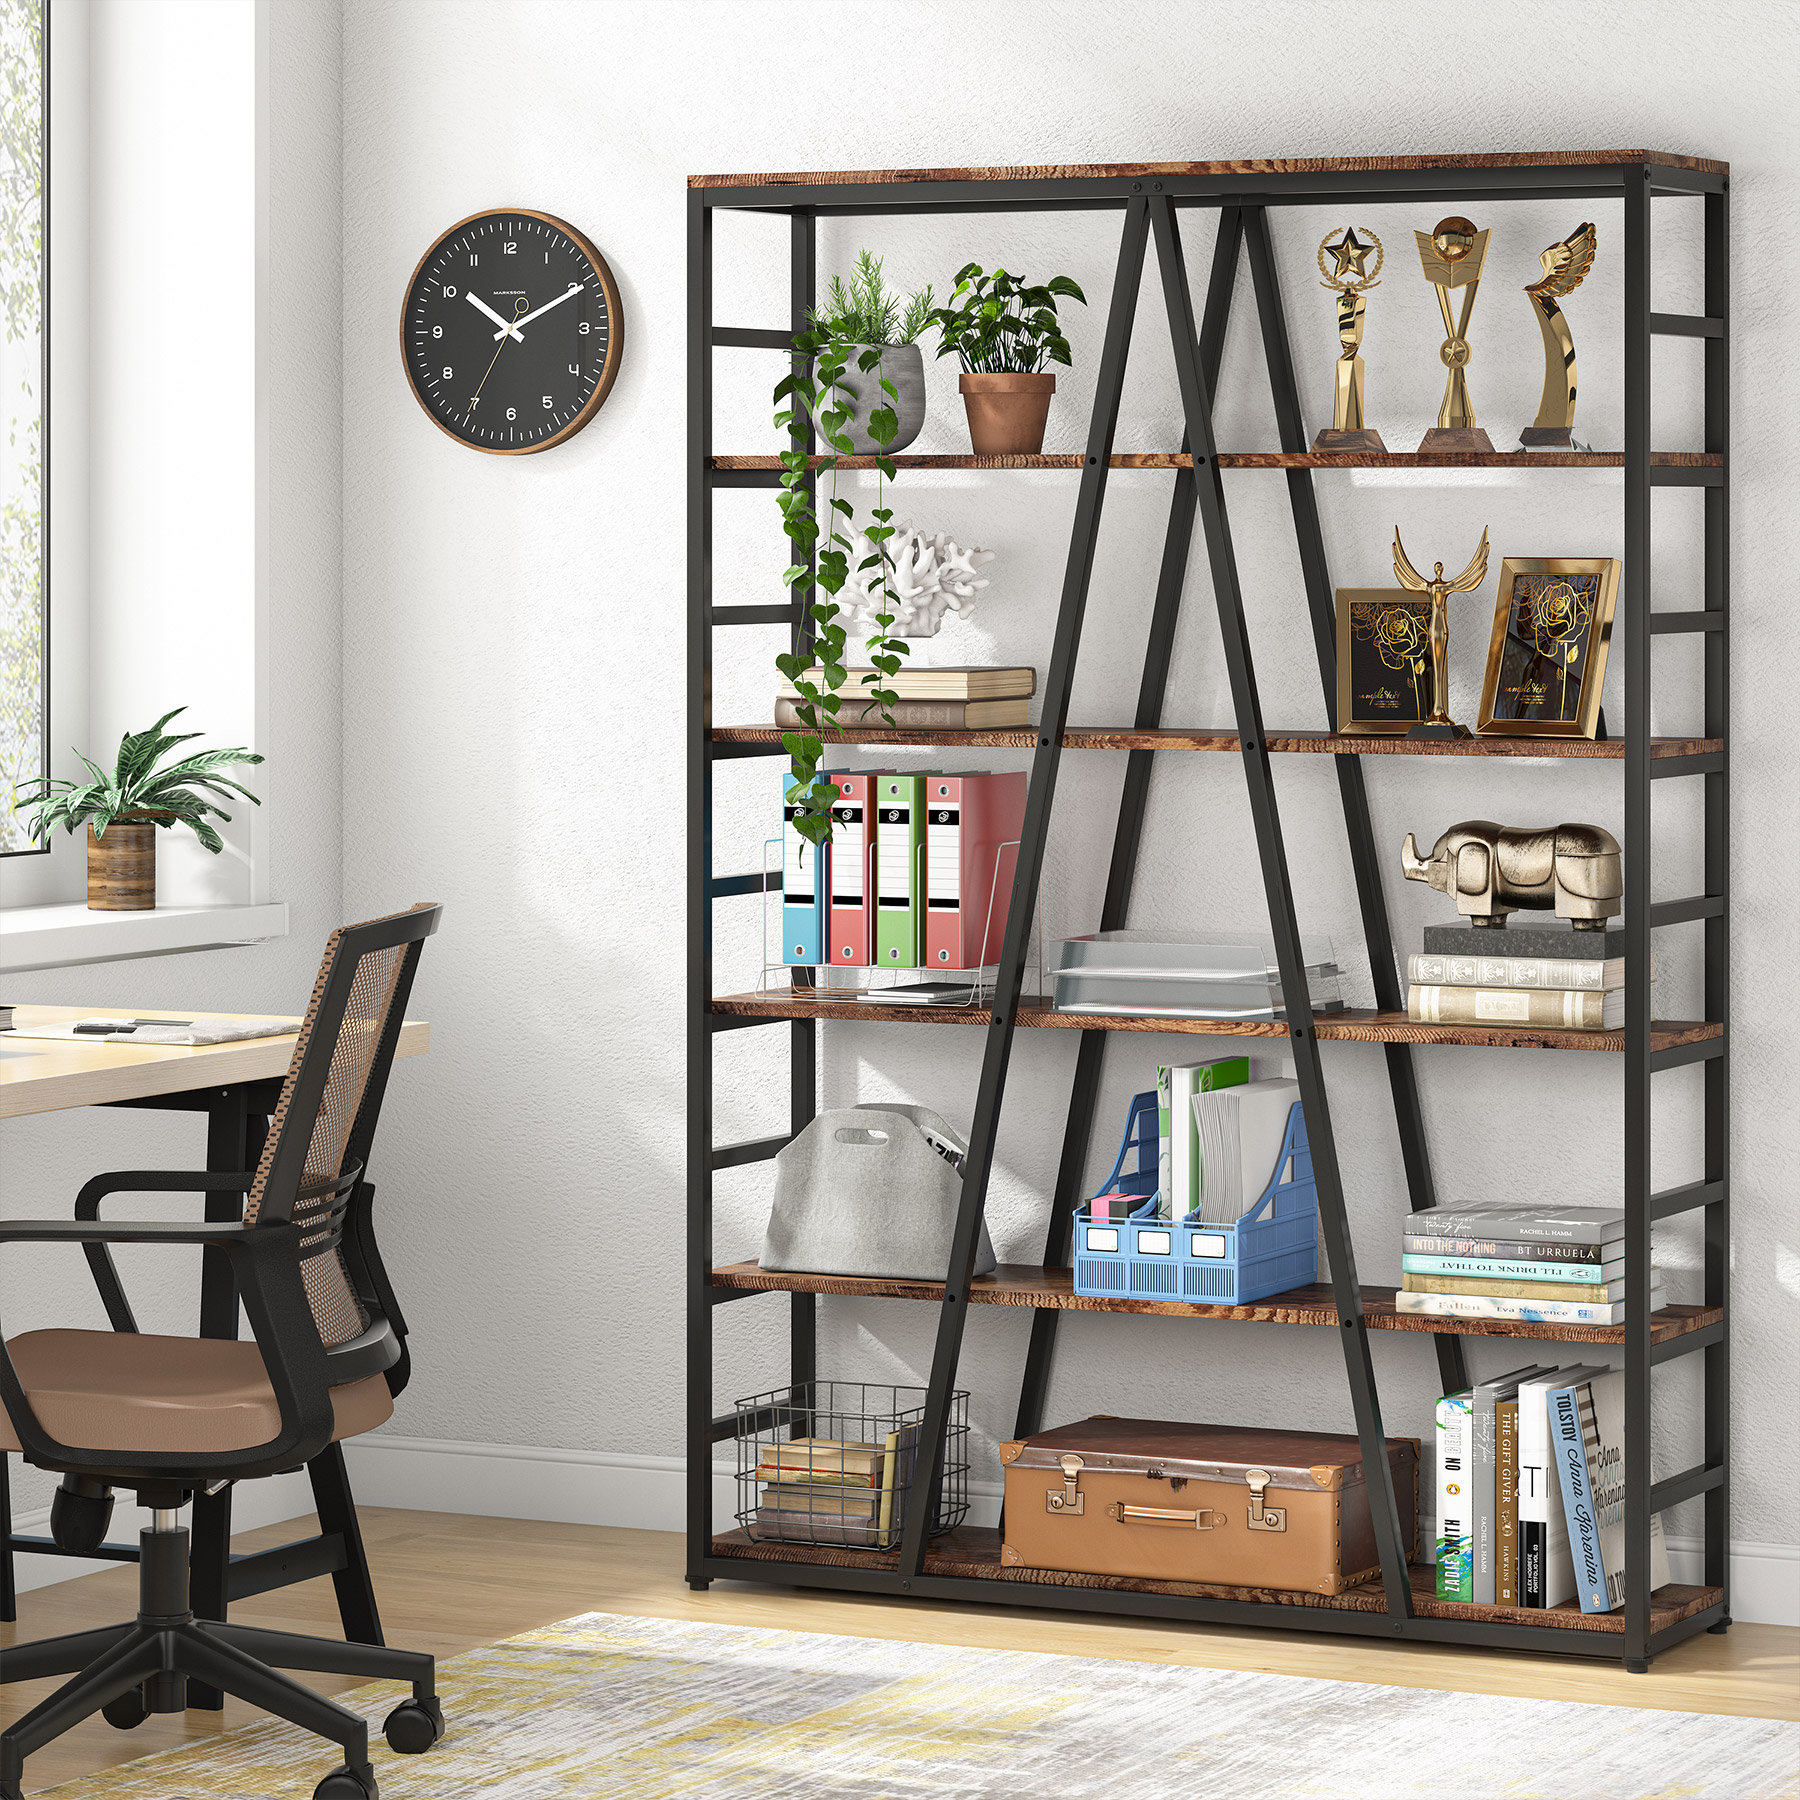 Etagere Bookcase with Cabinet Larger Industrial Style Book Shelf for Bedroom Triple Wide 5 Tier Bookshelf 65L×13W×69.7H Inches Living Room and Office Walnut Brown